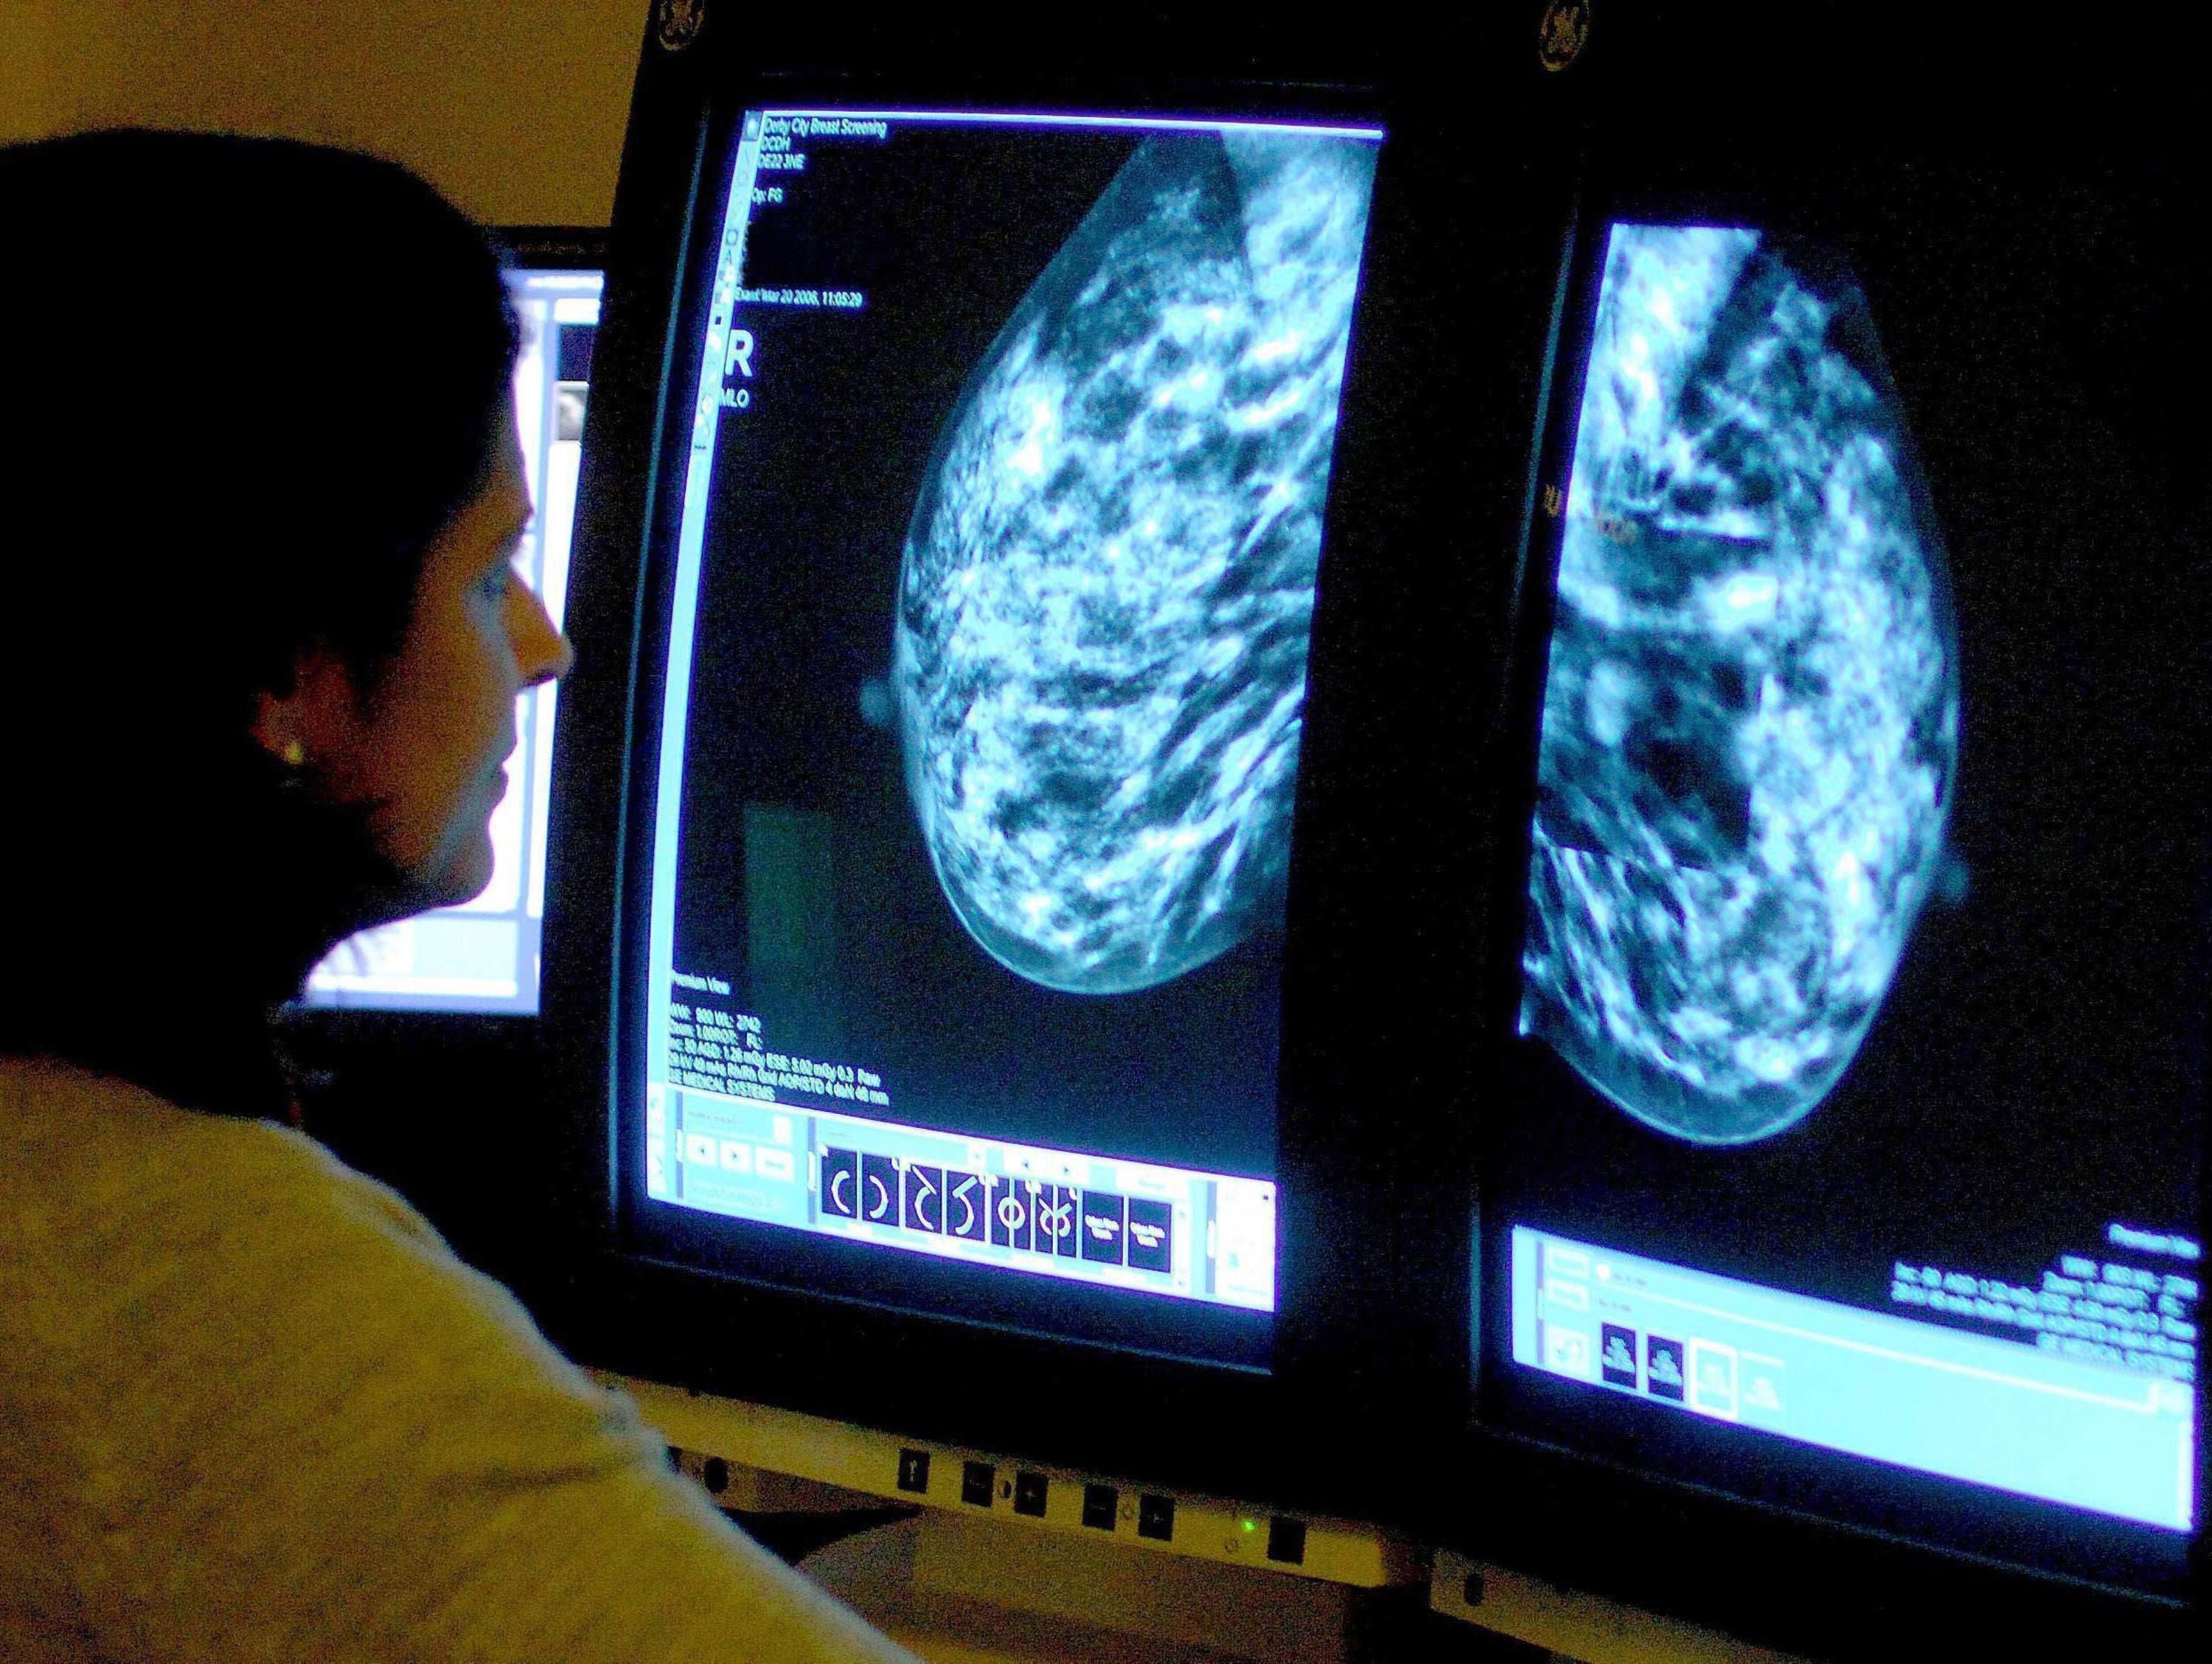 69,000 patients in UK waiting longer than recommended 62-day wait from suspected cancer referral to treatment